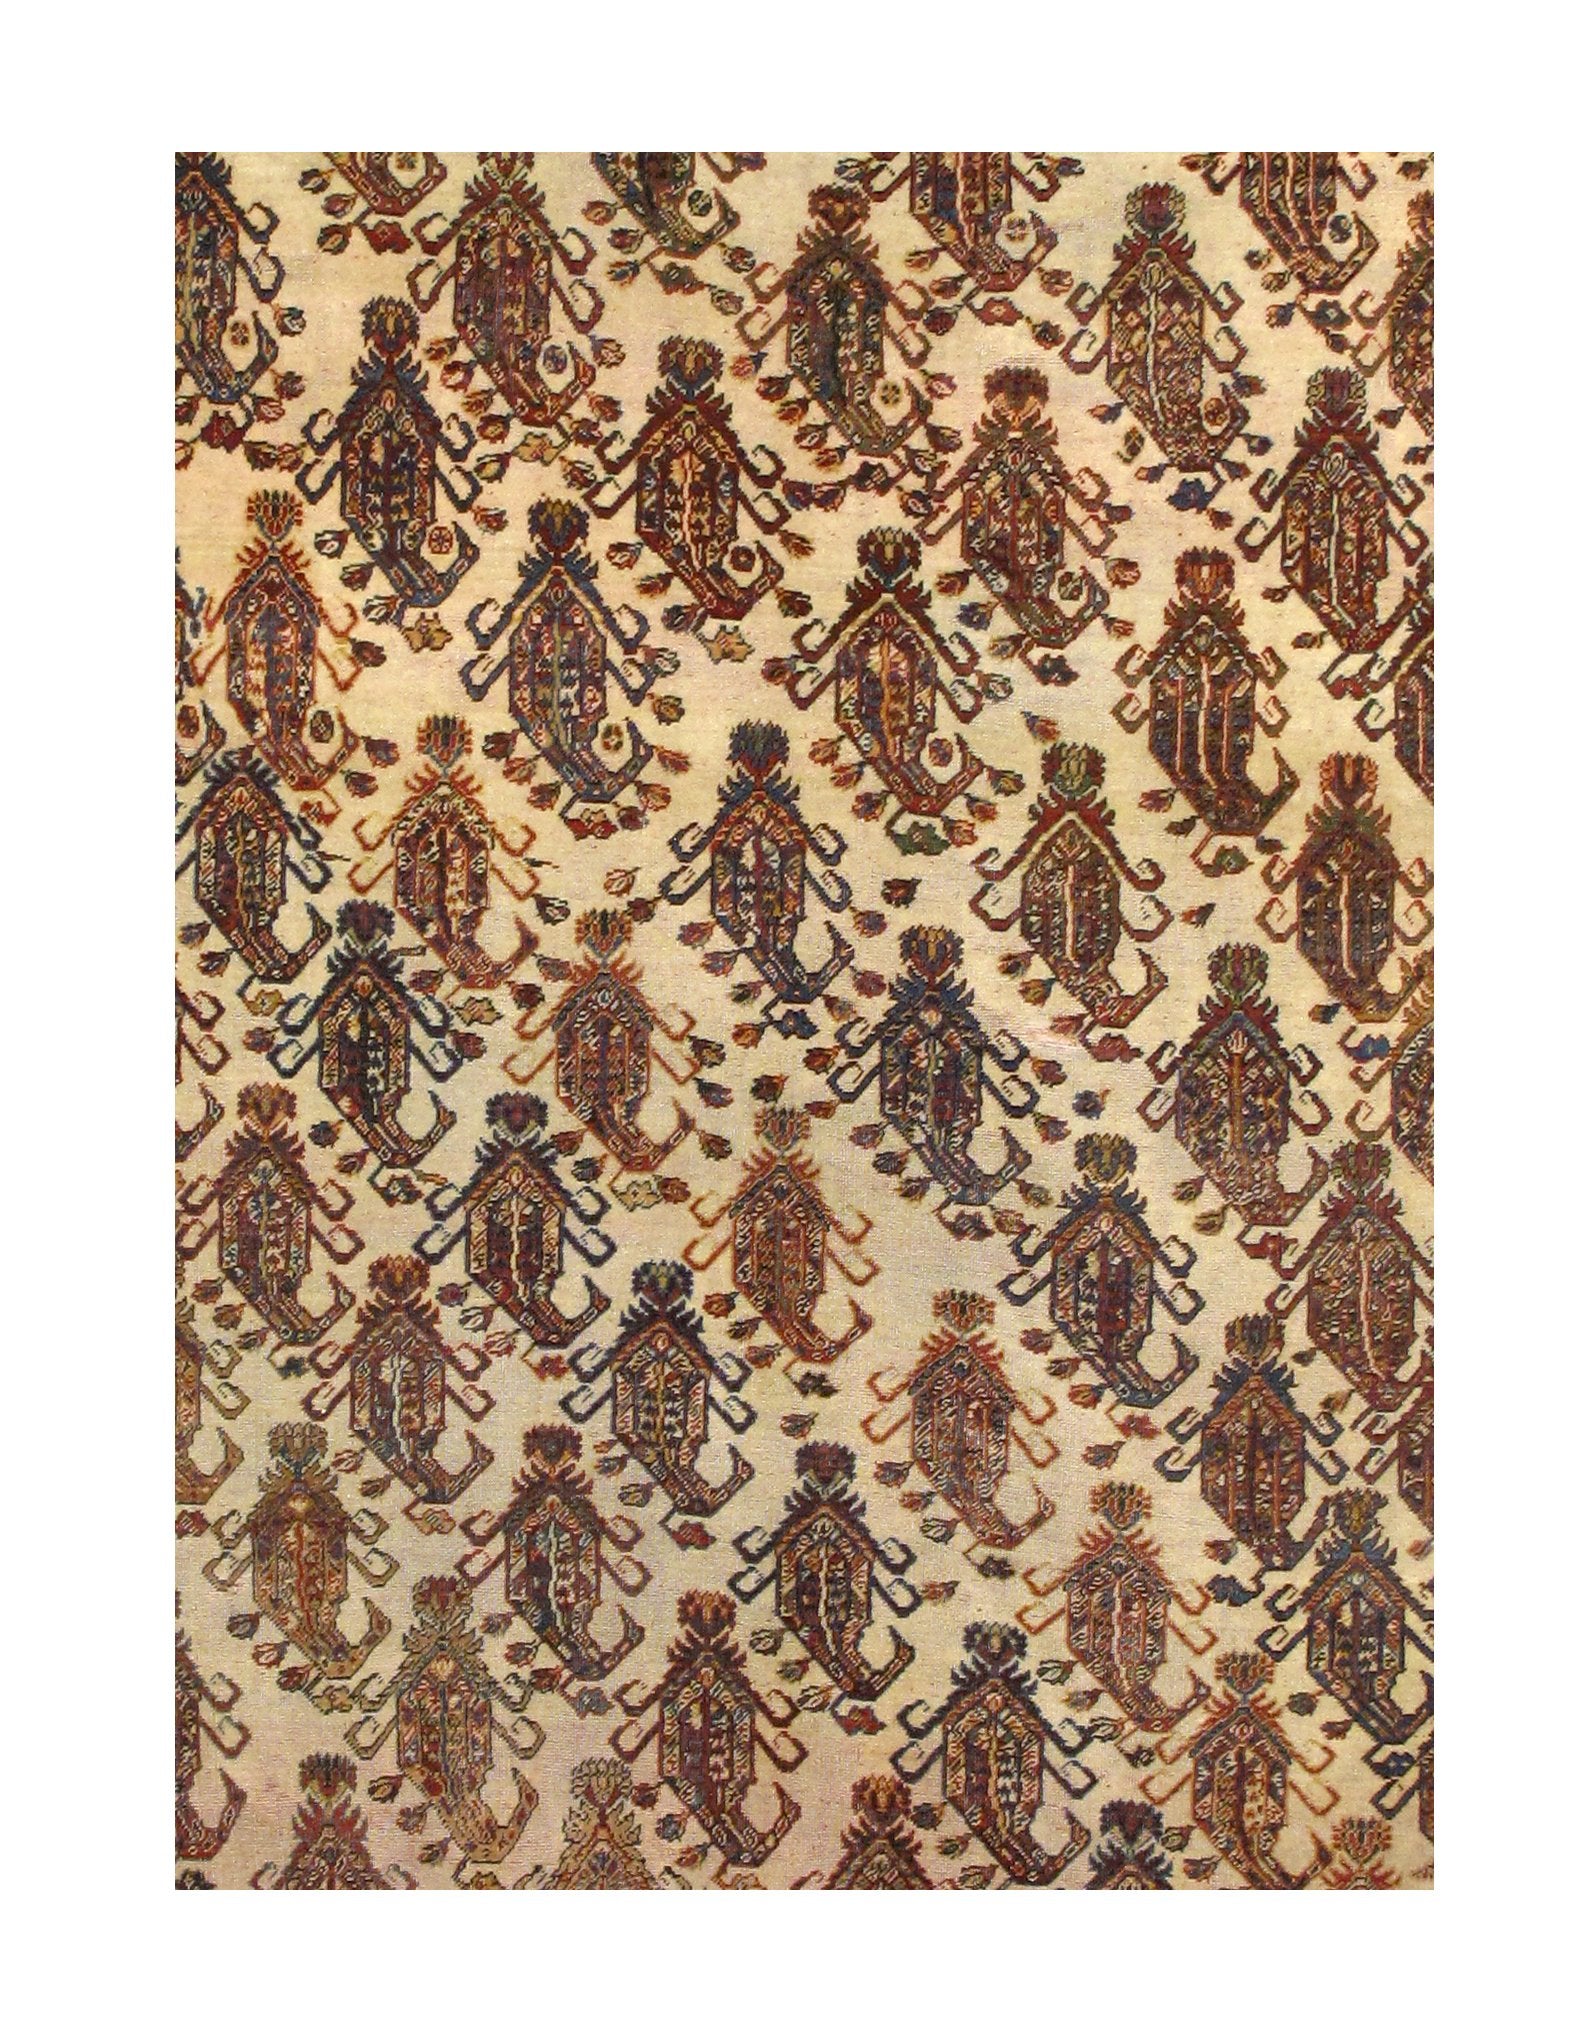 Extremely Fine Antique Persian Qashqai Tribal Rug